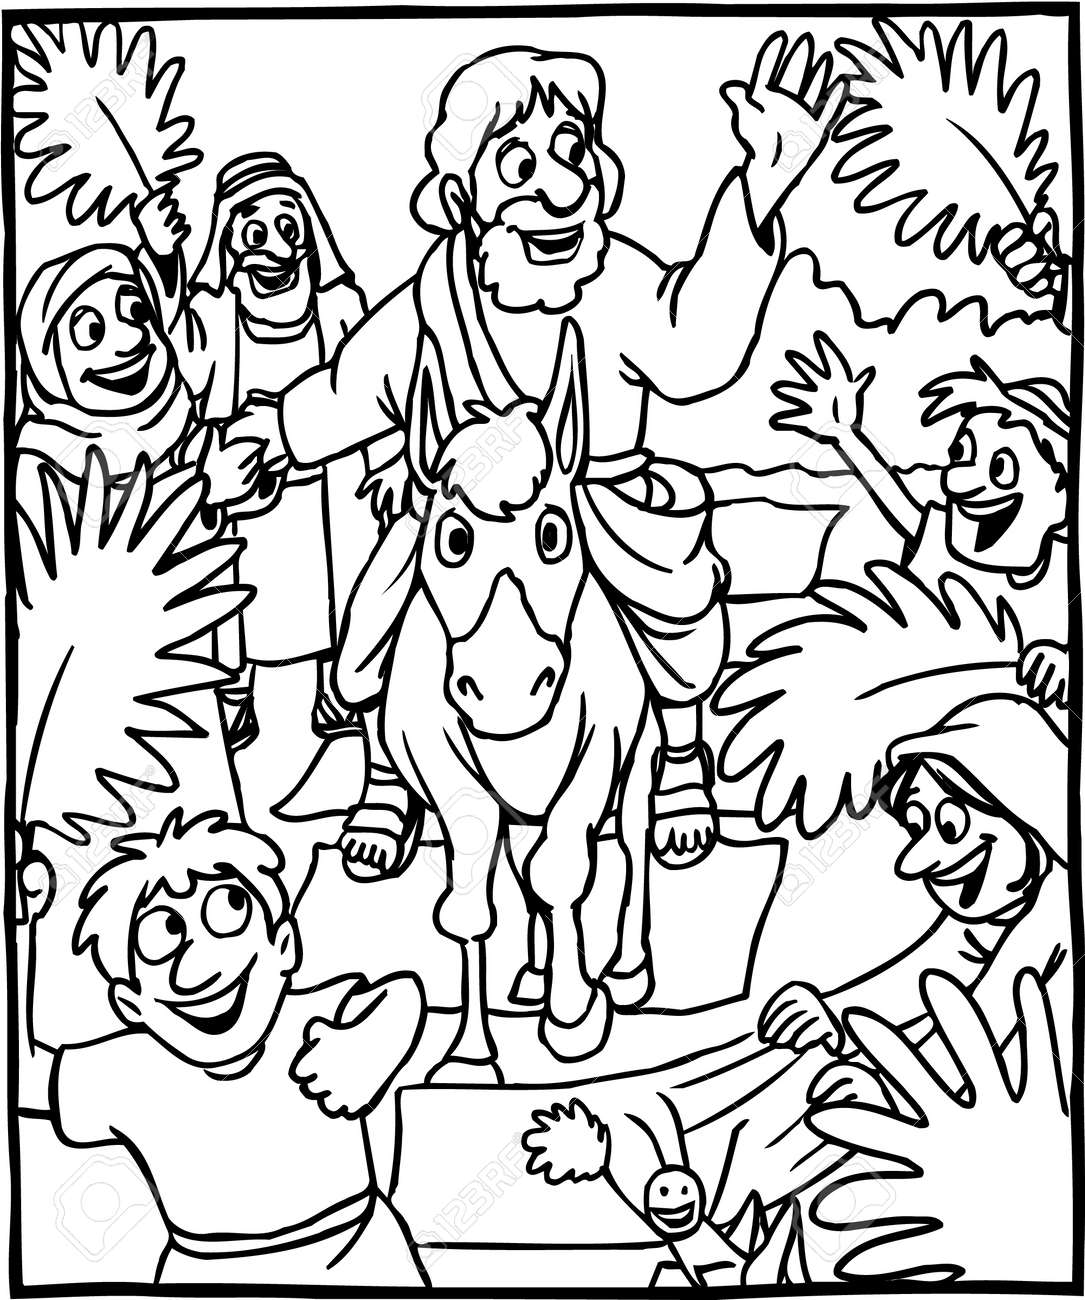 Coloring page jesus triumphal entry royalty free svg cliparts vectors and stock illustration image